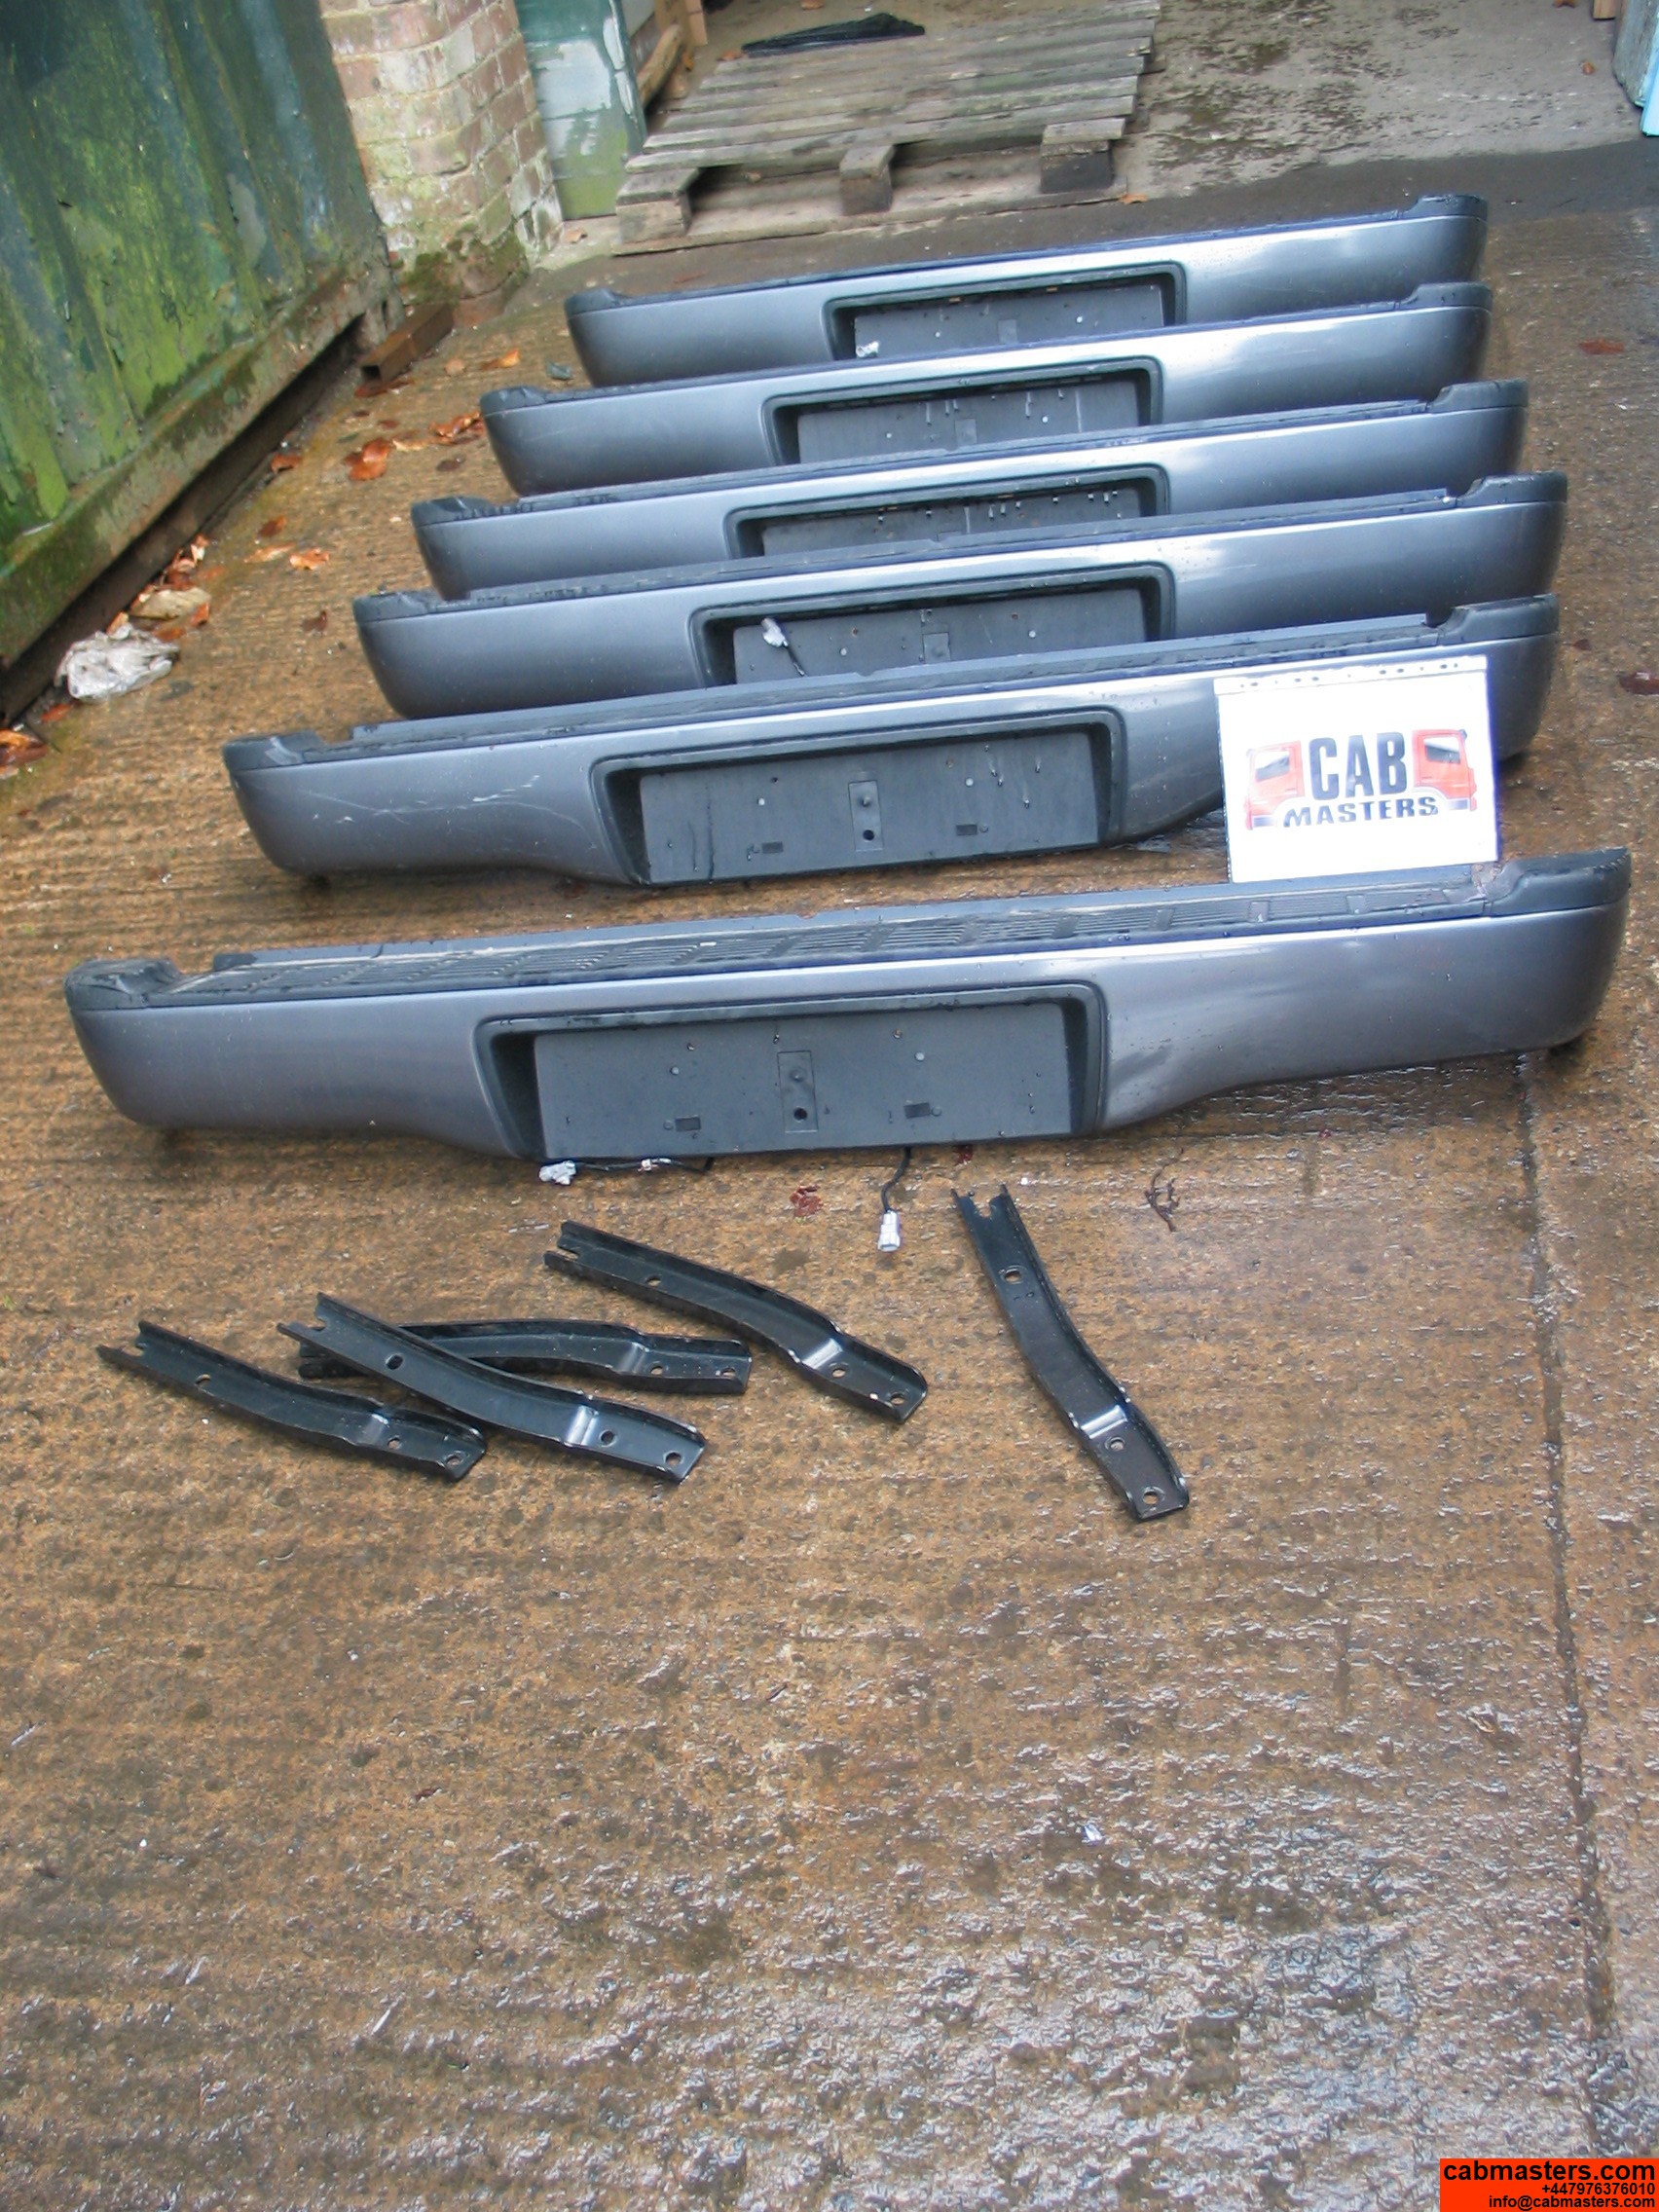 Toyota Hilux Rear Bumpers